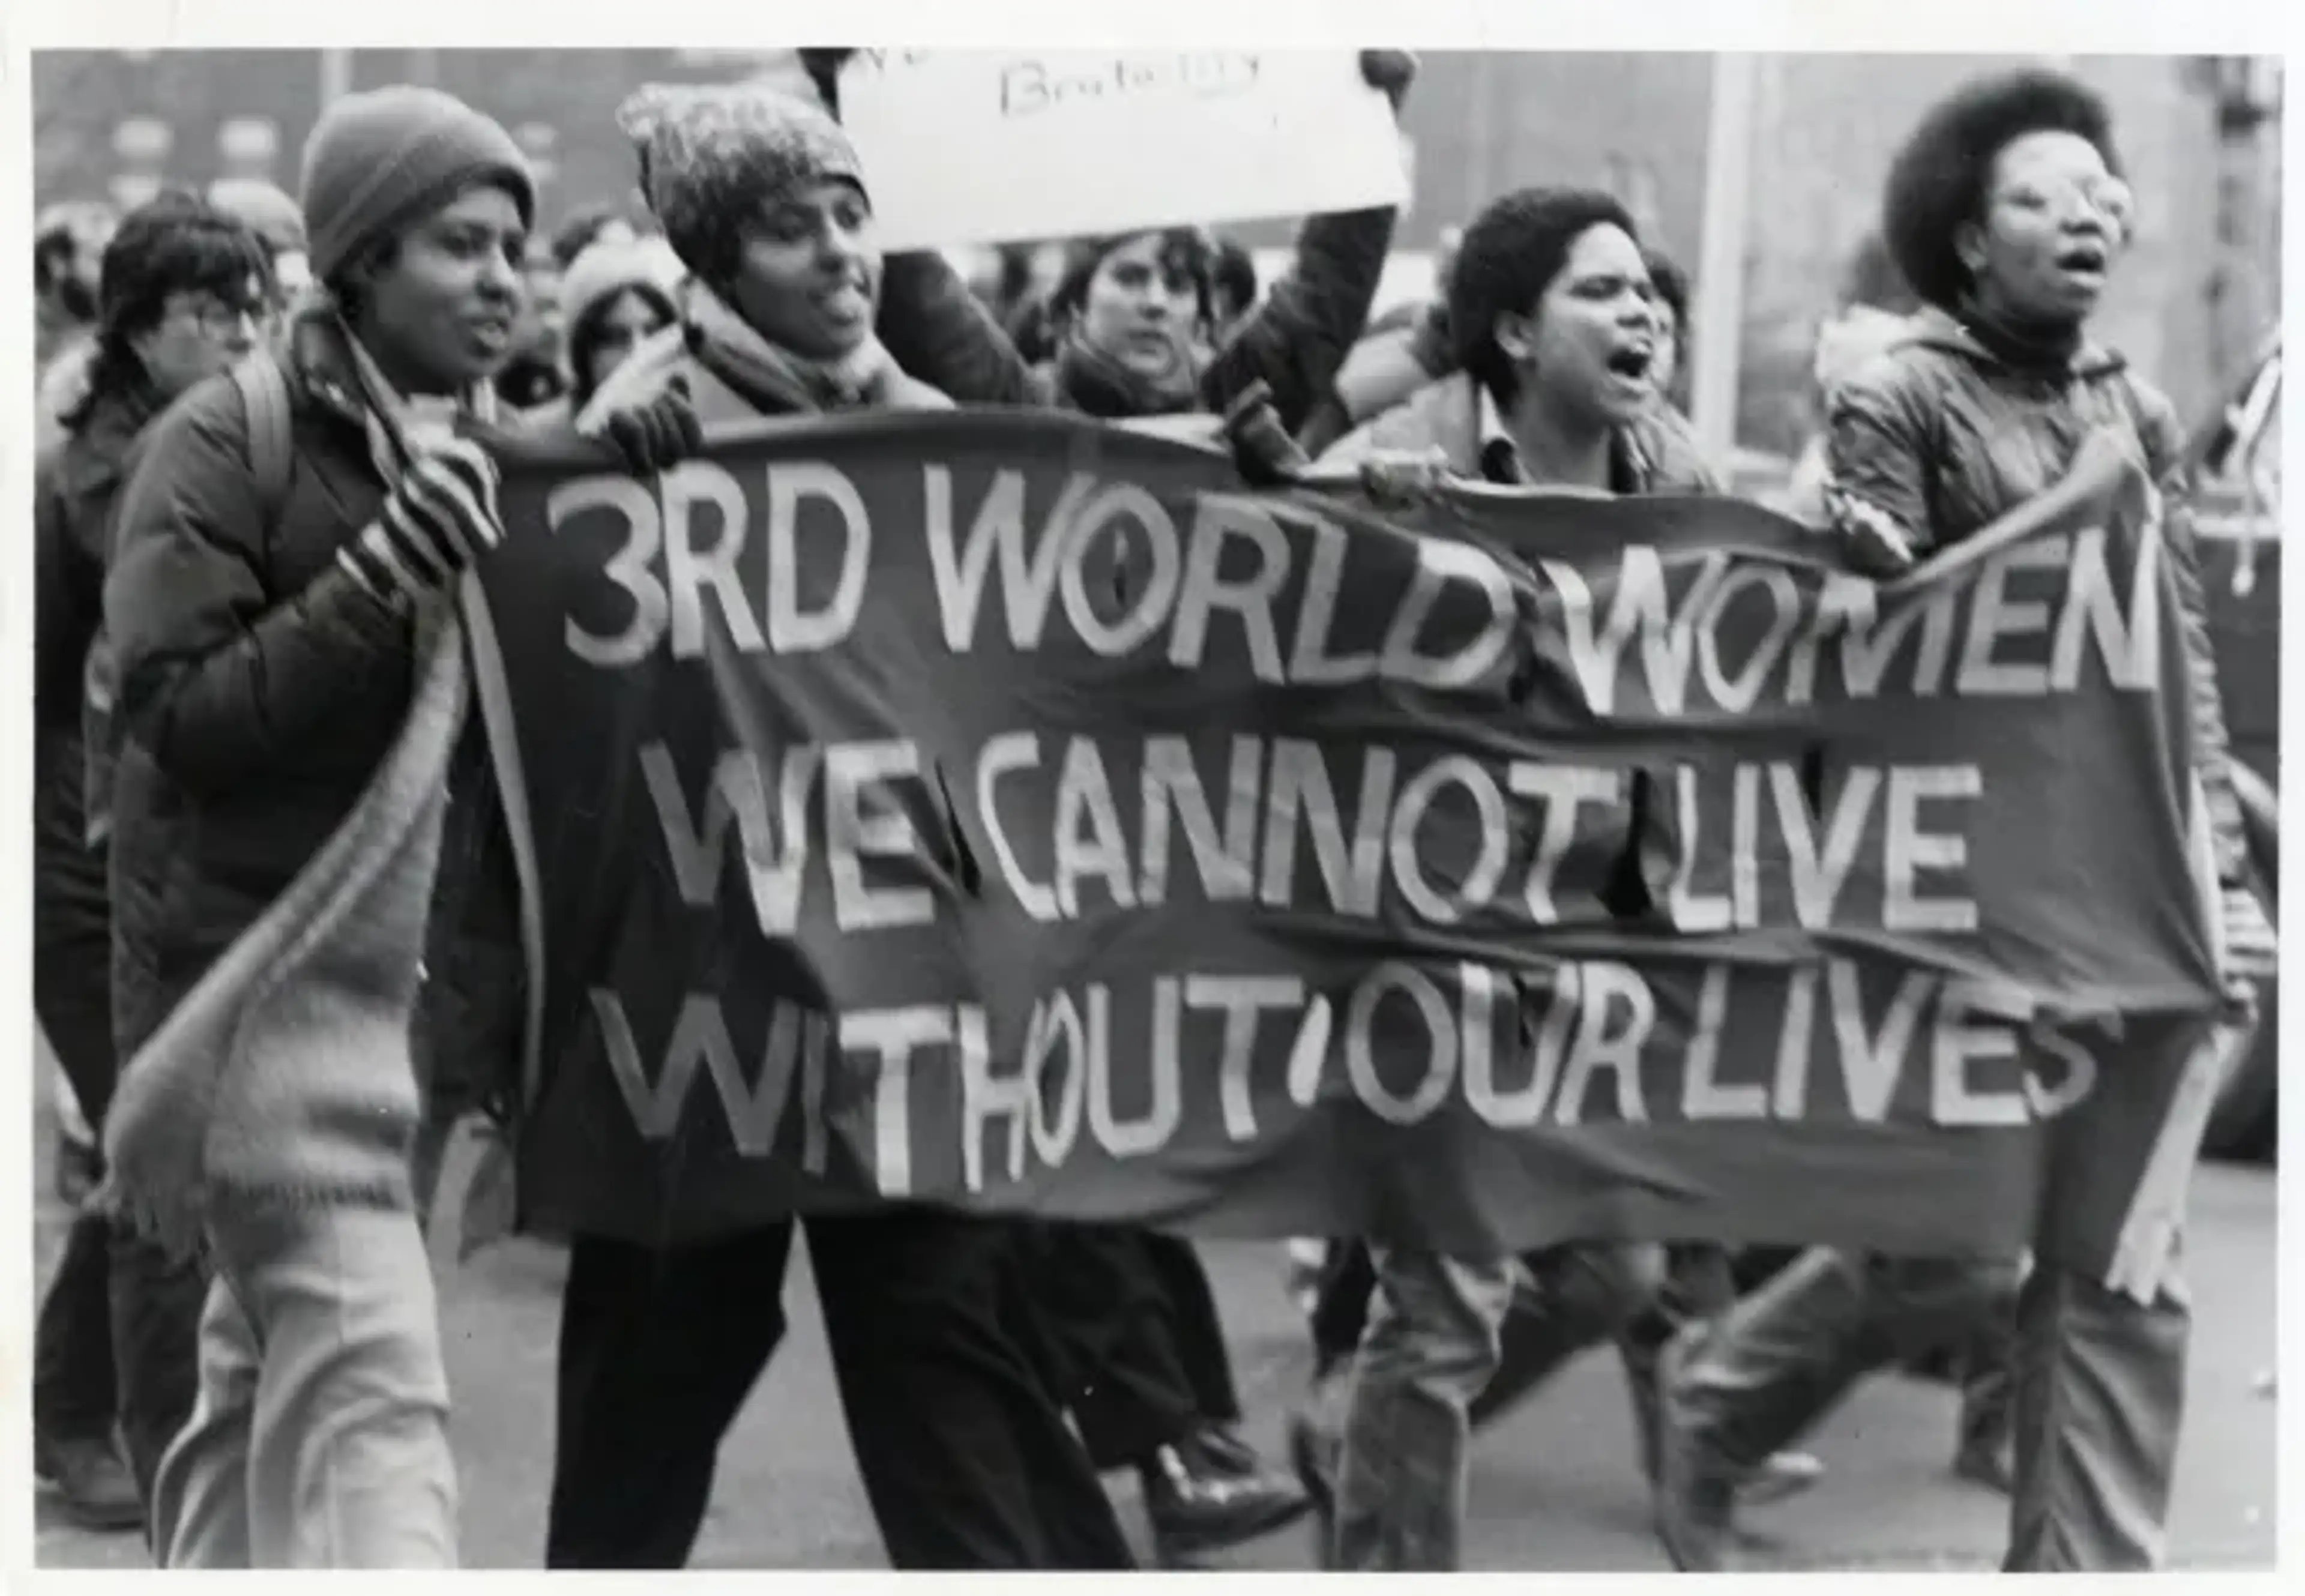 Women holding a banner in protect that reads 3RD WORLD WOMEN - WE CANNOT LIVE WITHOUT OUR LIVES